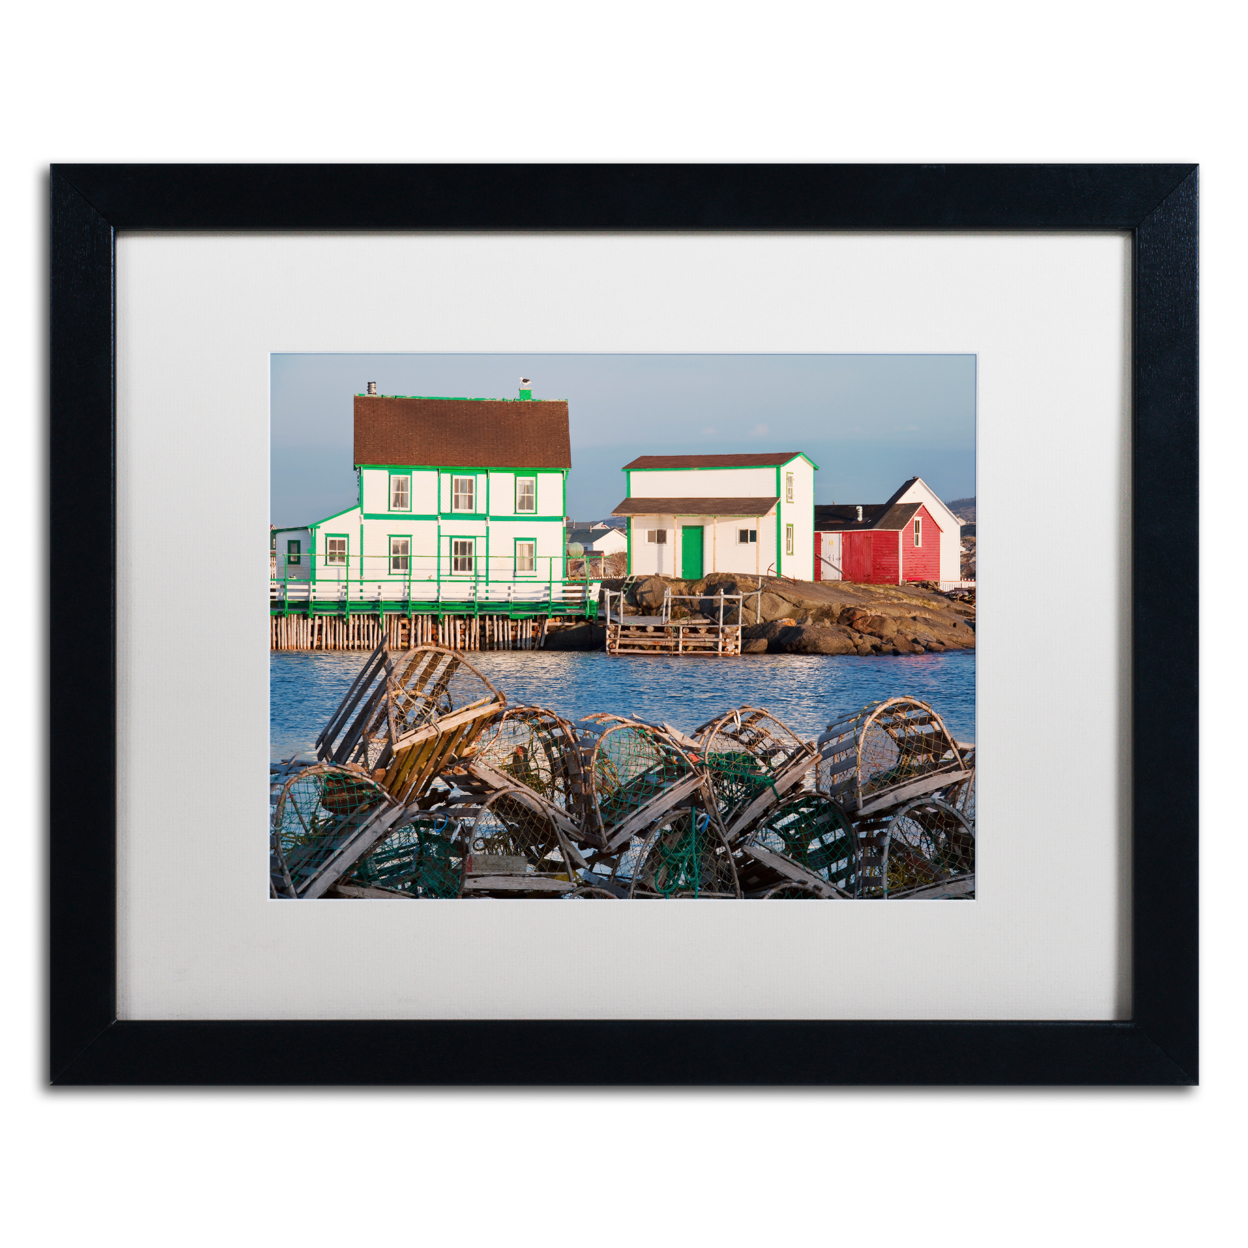 Michael Blanchette Photography 'Lobster Traps' Black Wooden Framed Art 18 X 22 Inches